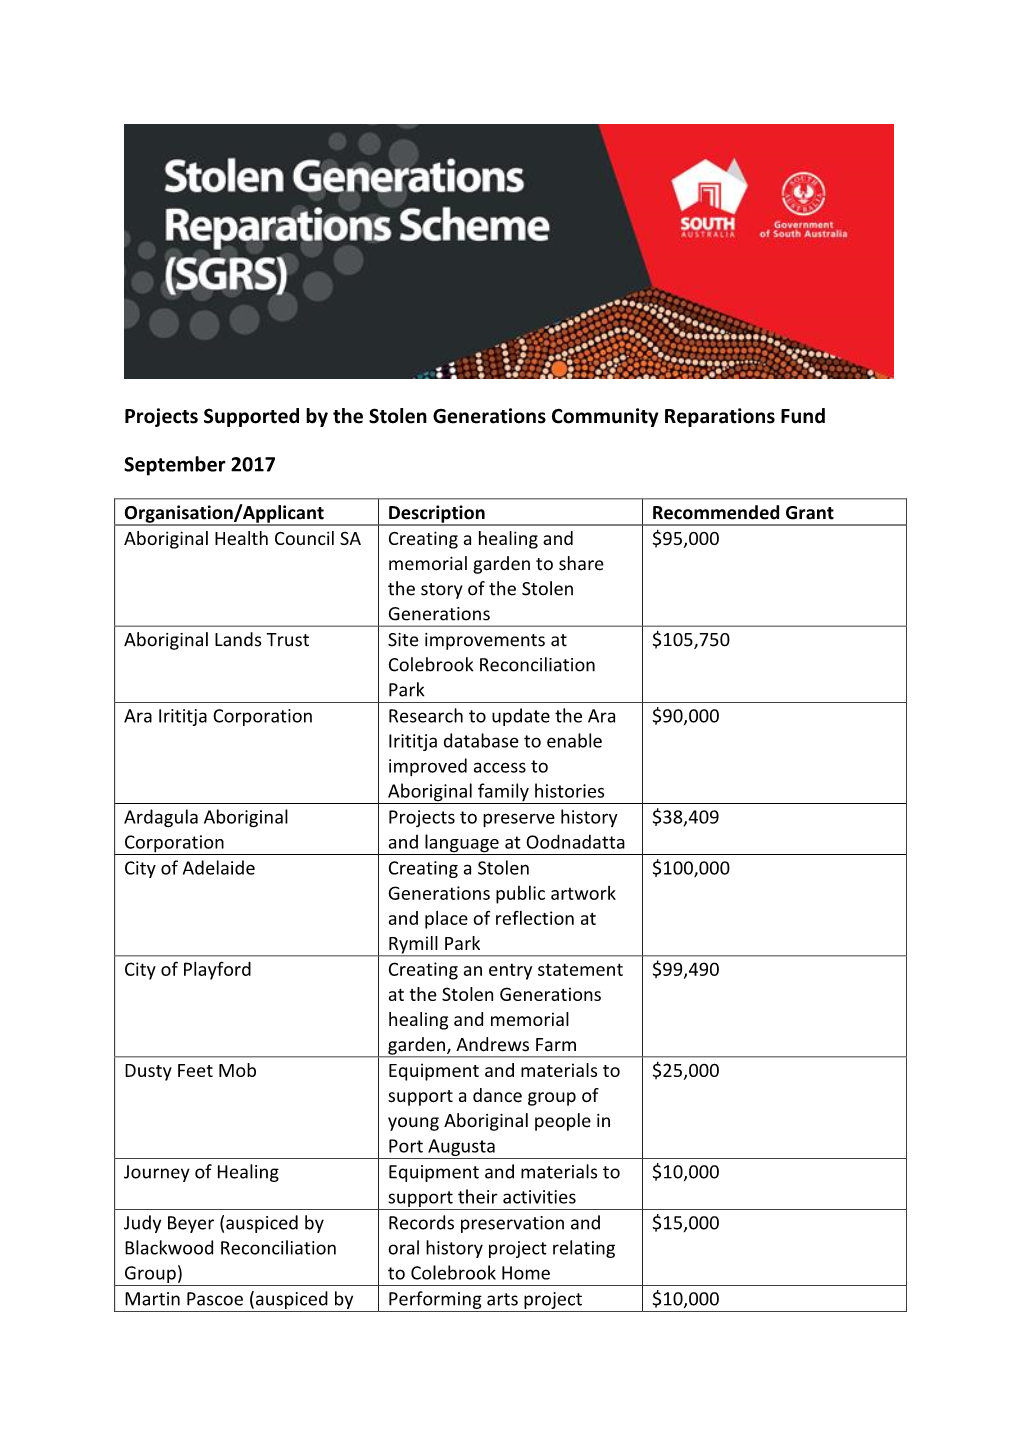 Projects Supported by the Stolen Generations Community Reparations Fund